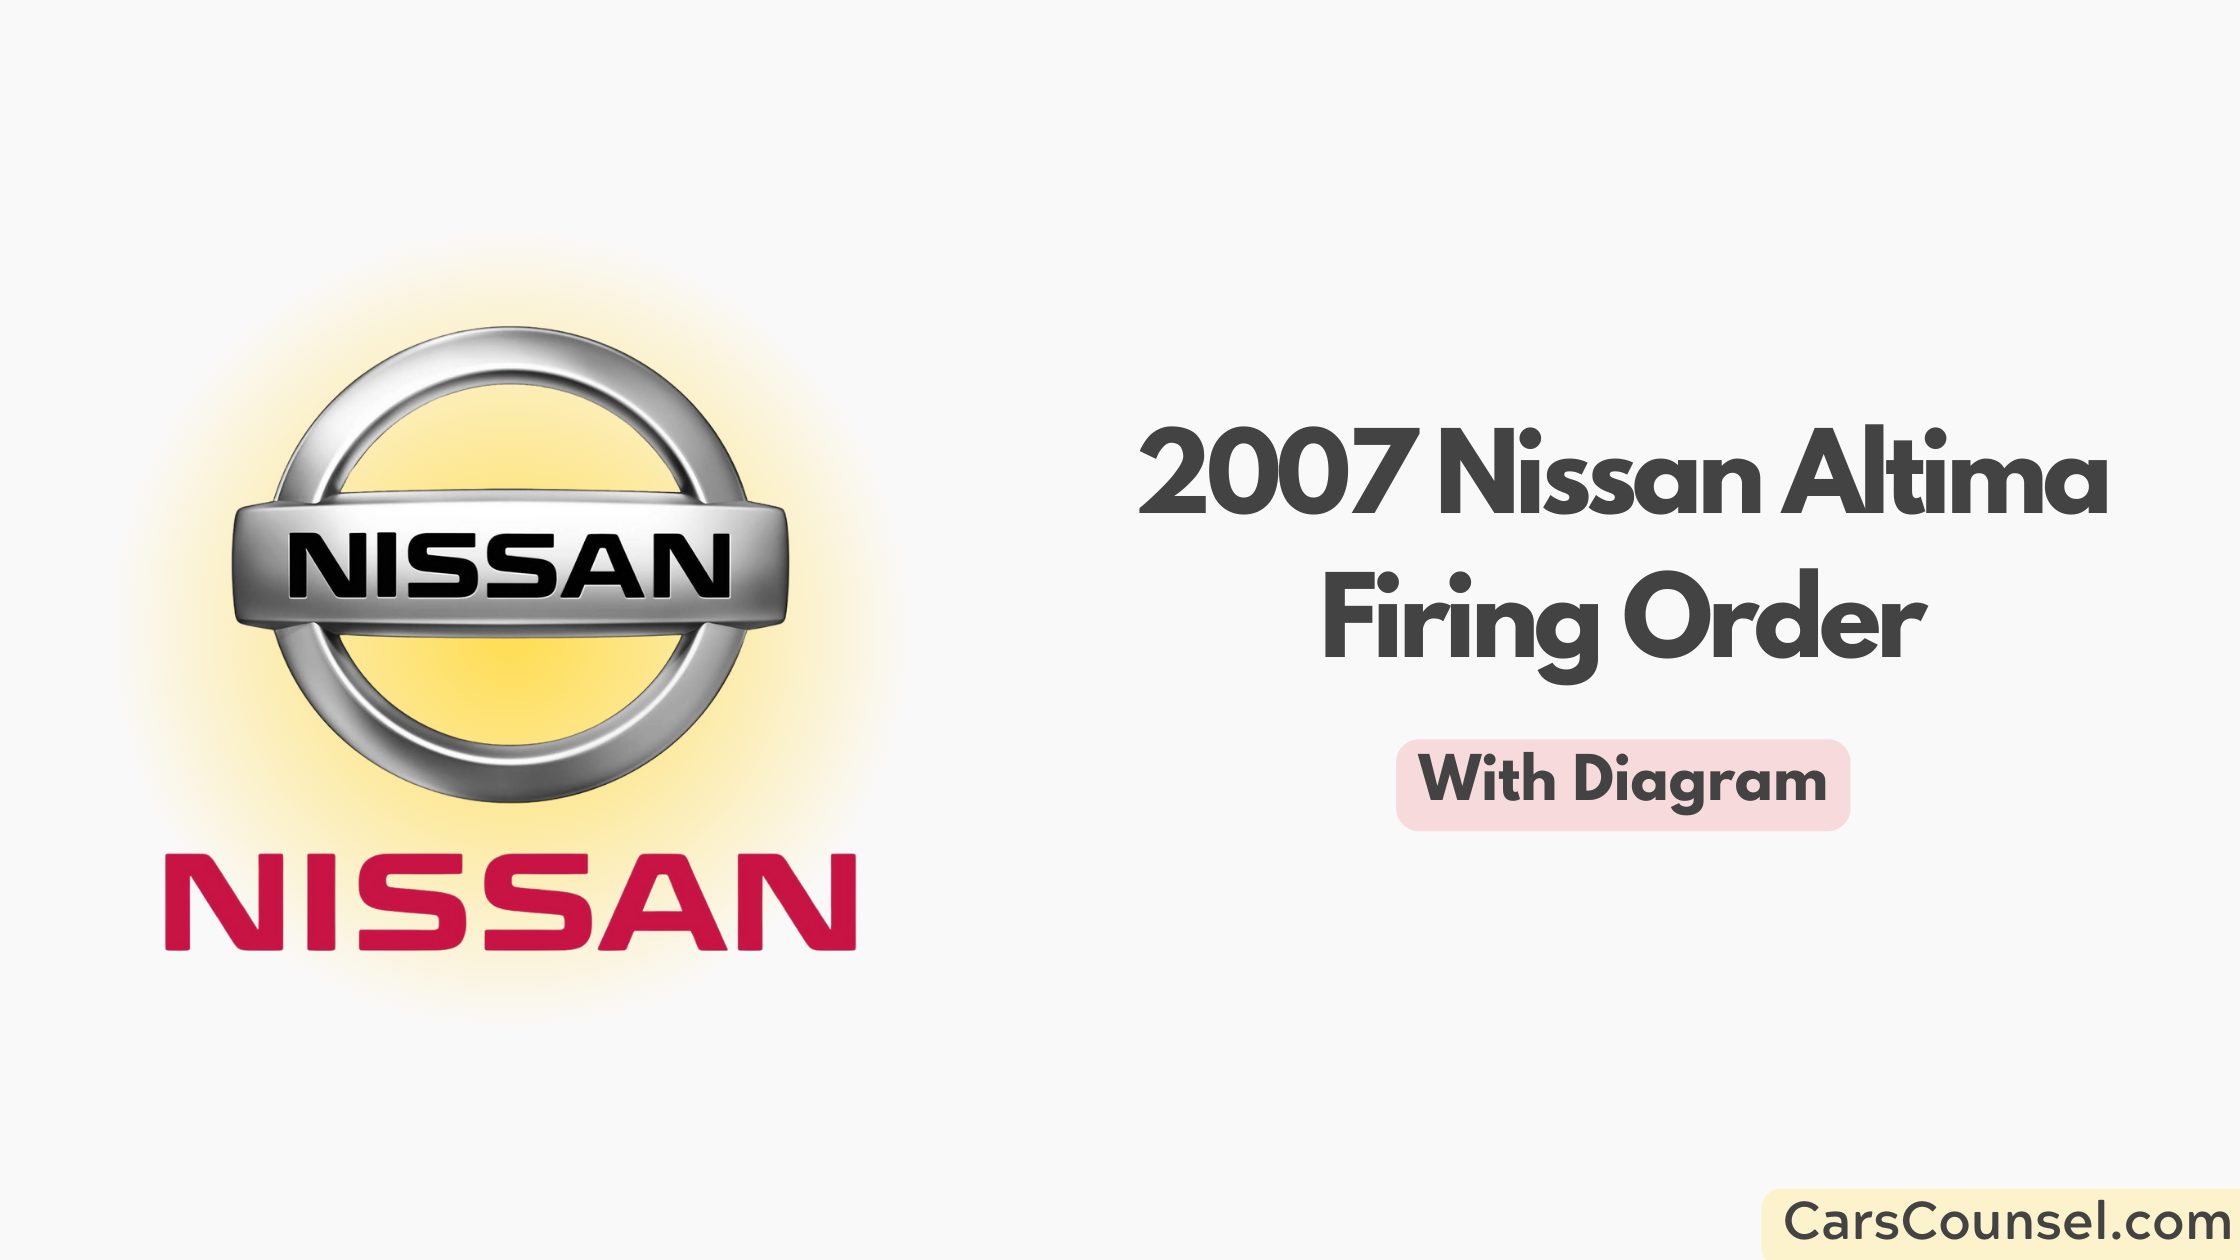 2007 Nissan Altima Firing Order With Diagram